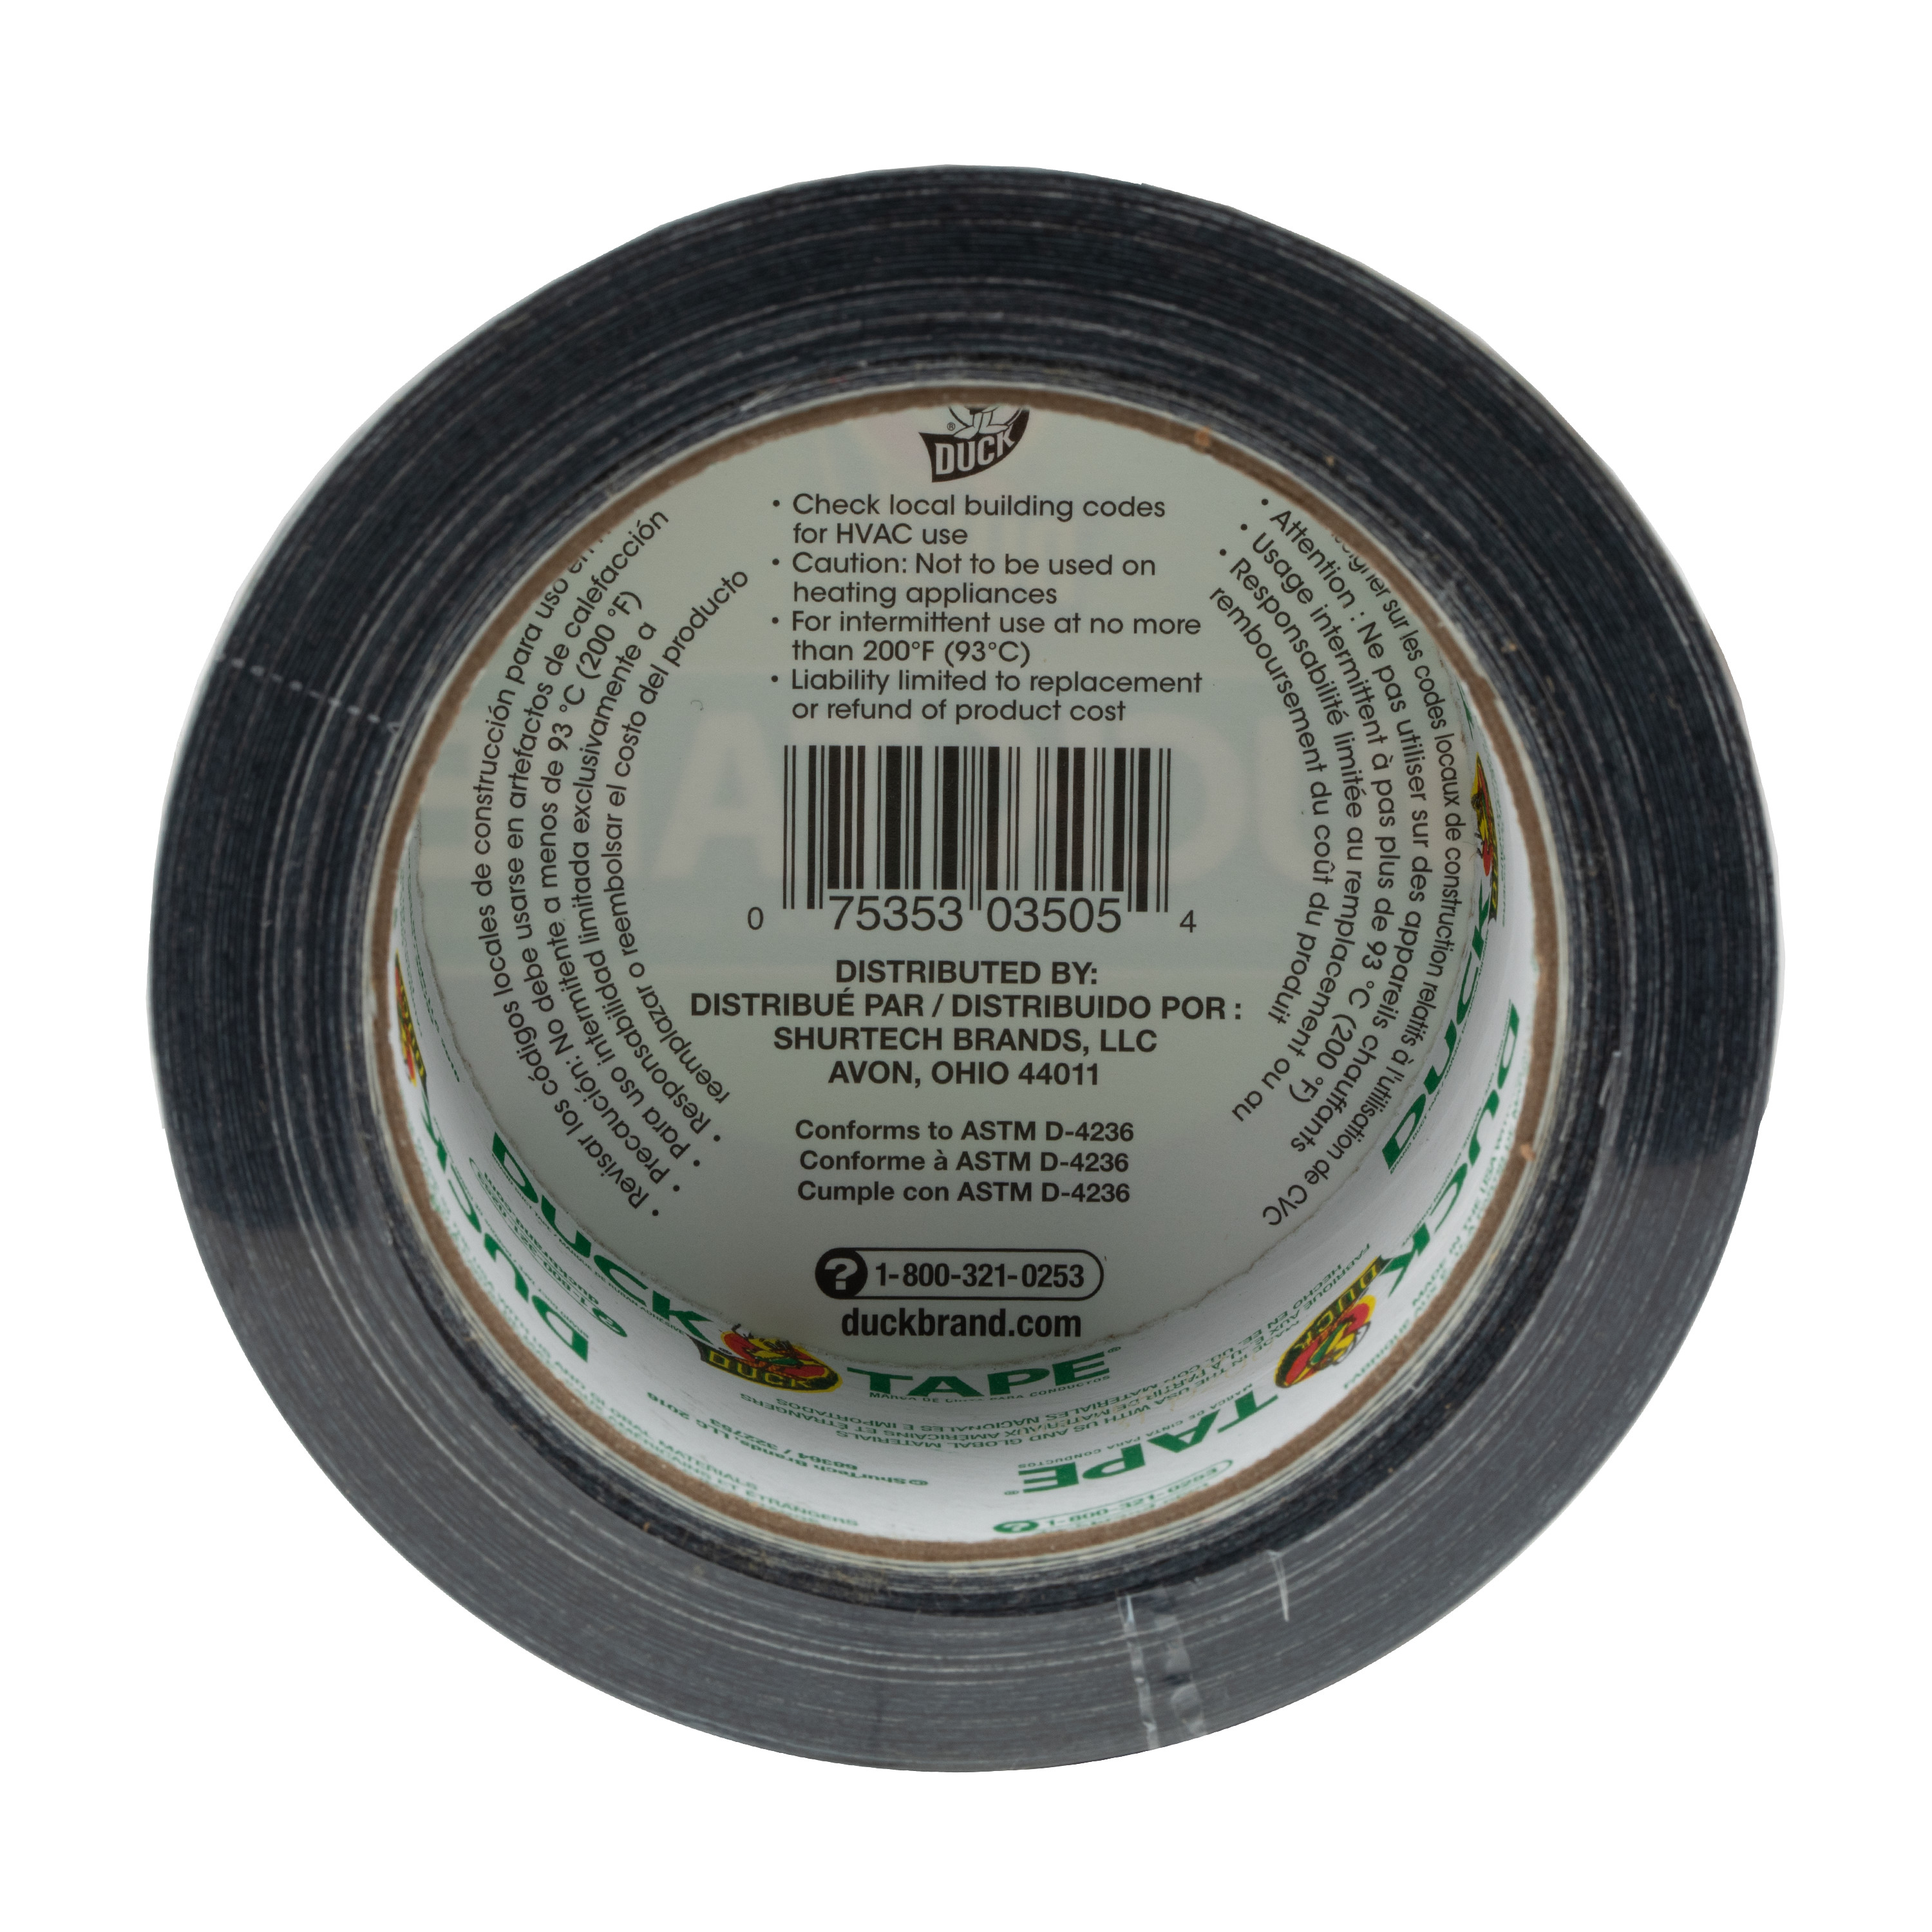 Duck Tape Brand Black Duct Tape, 1.88 in. x 20 yd. - image 5 of 12